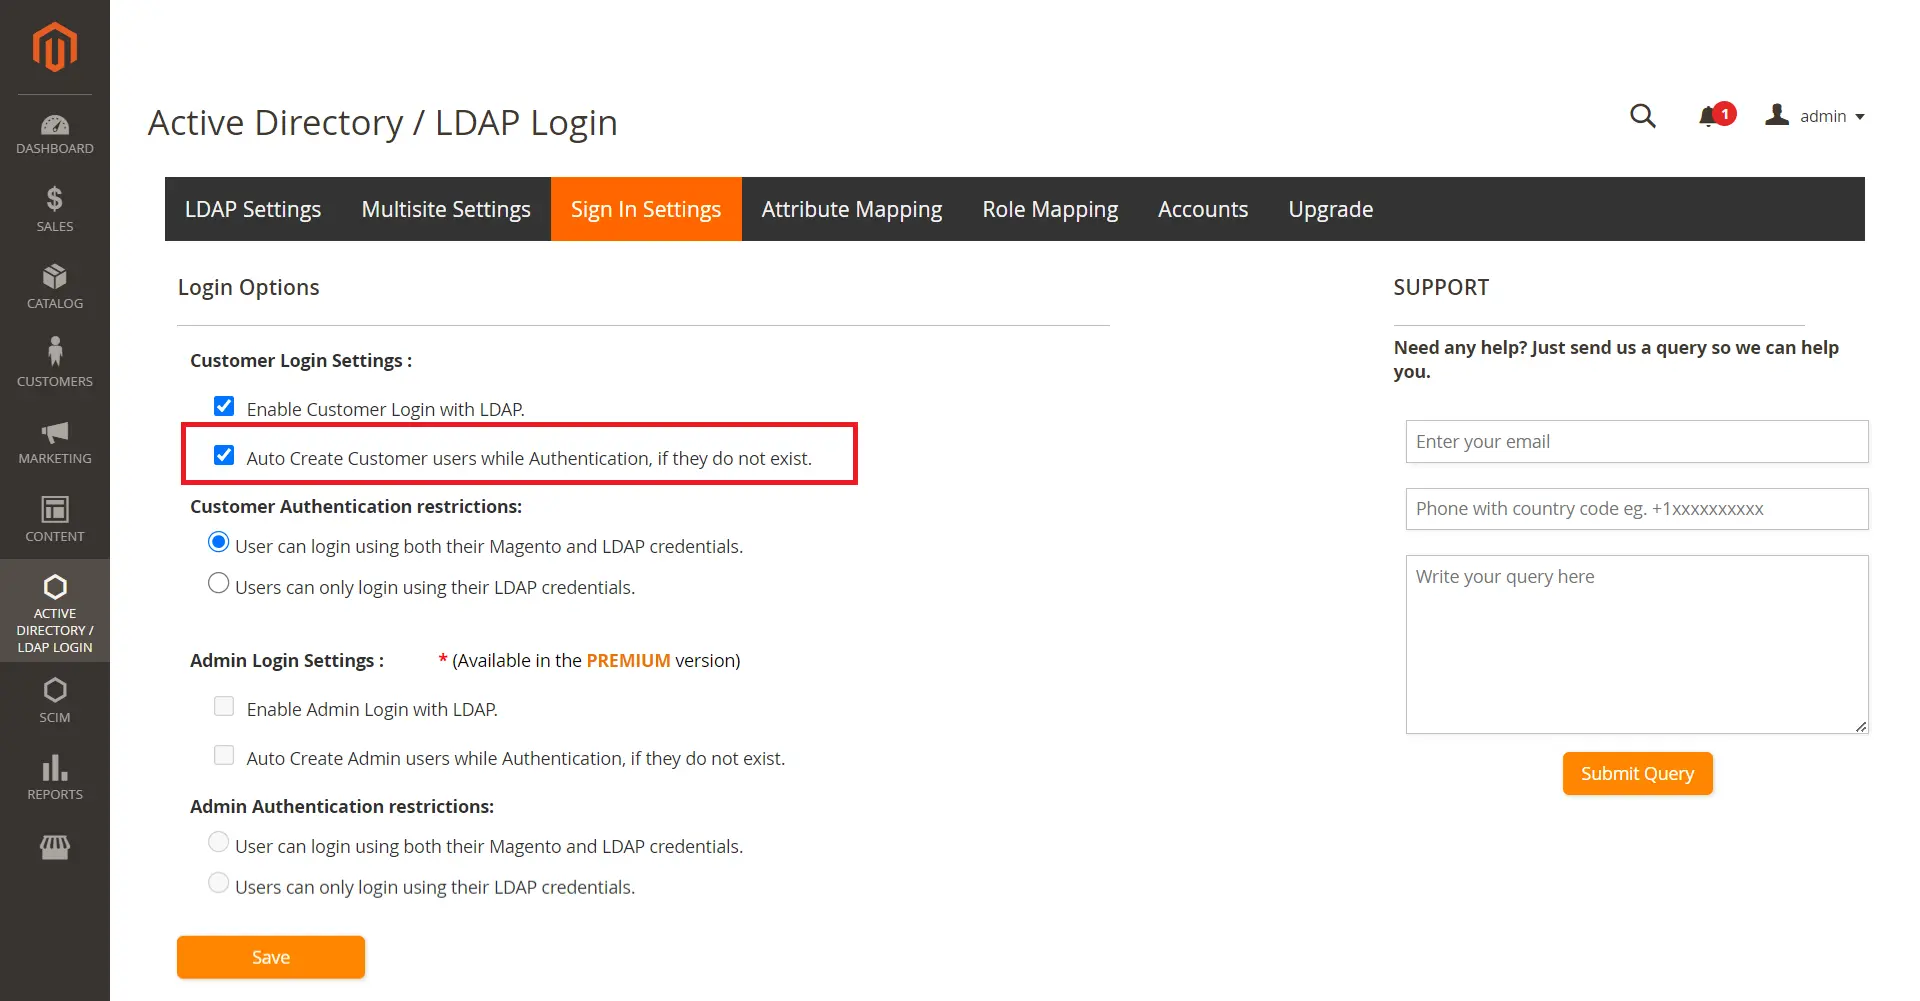 Magento LDAP Login and Active Directory SSO Enable Login with LDAP